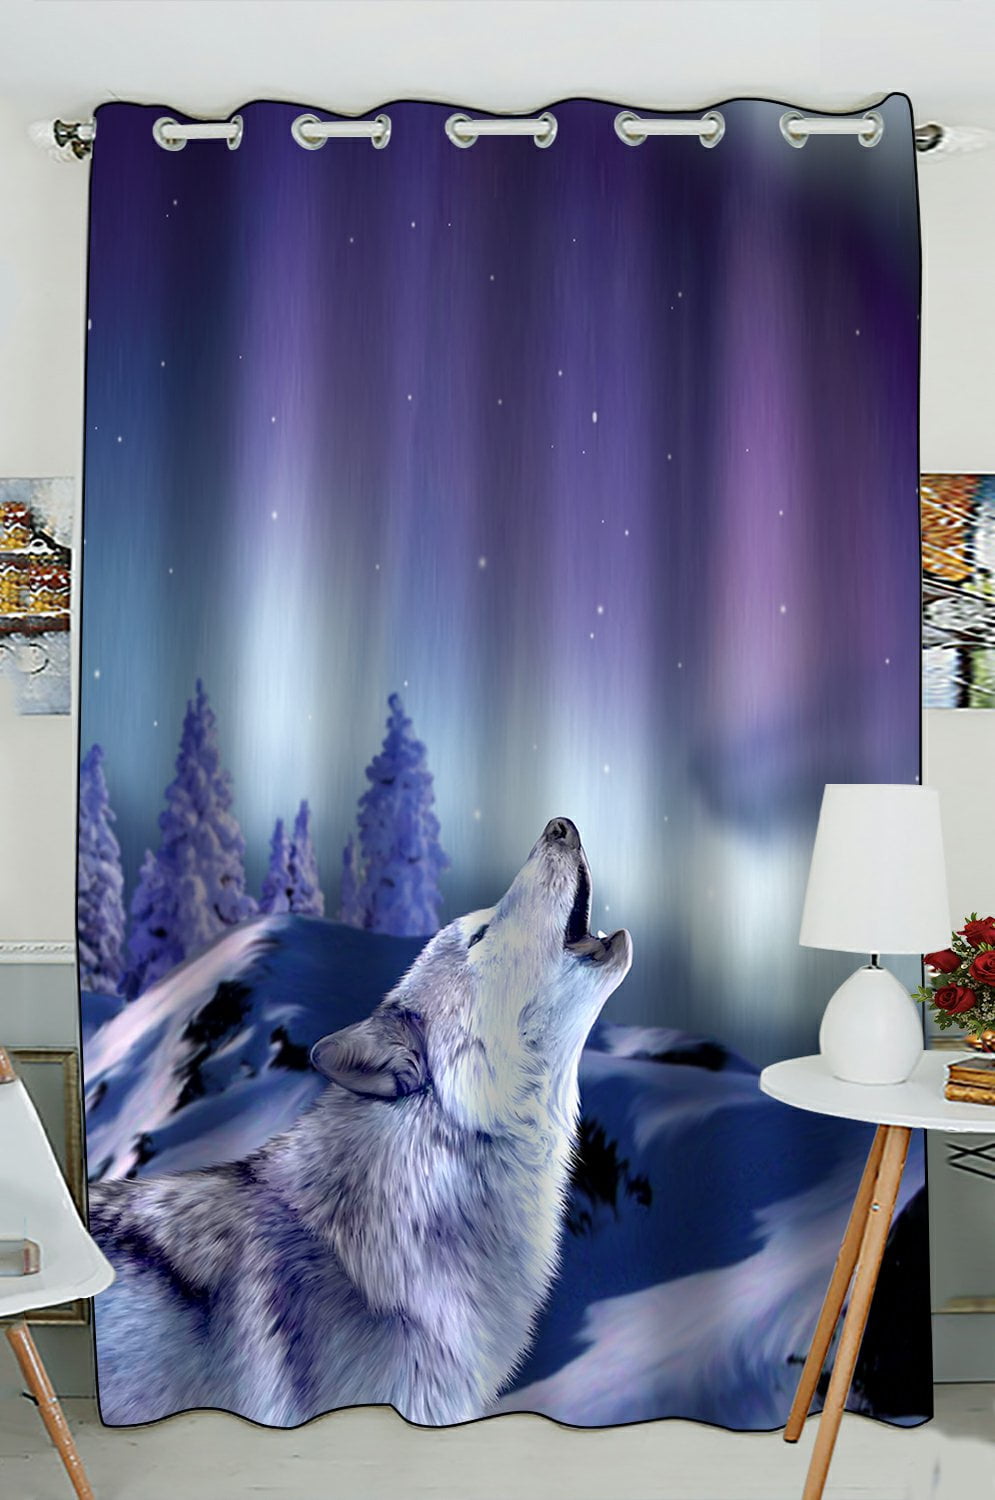 2Pcs Teen Animal Decor Blackout Curtain Drapes for Bedroom~Wolf 